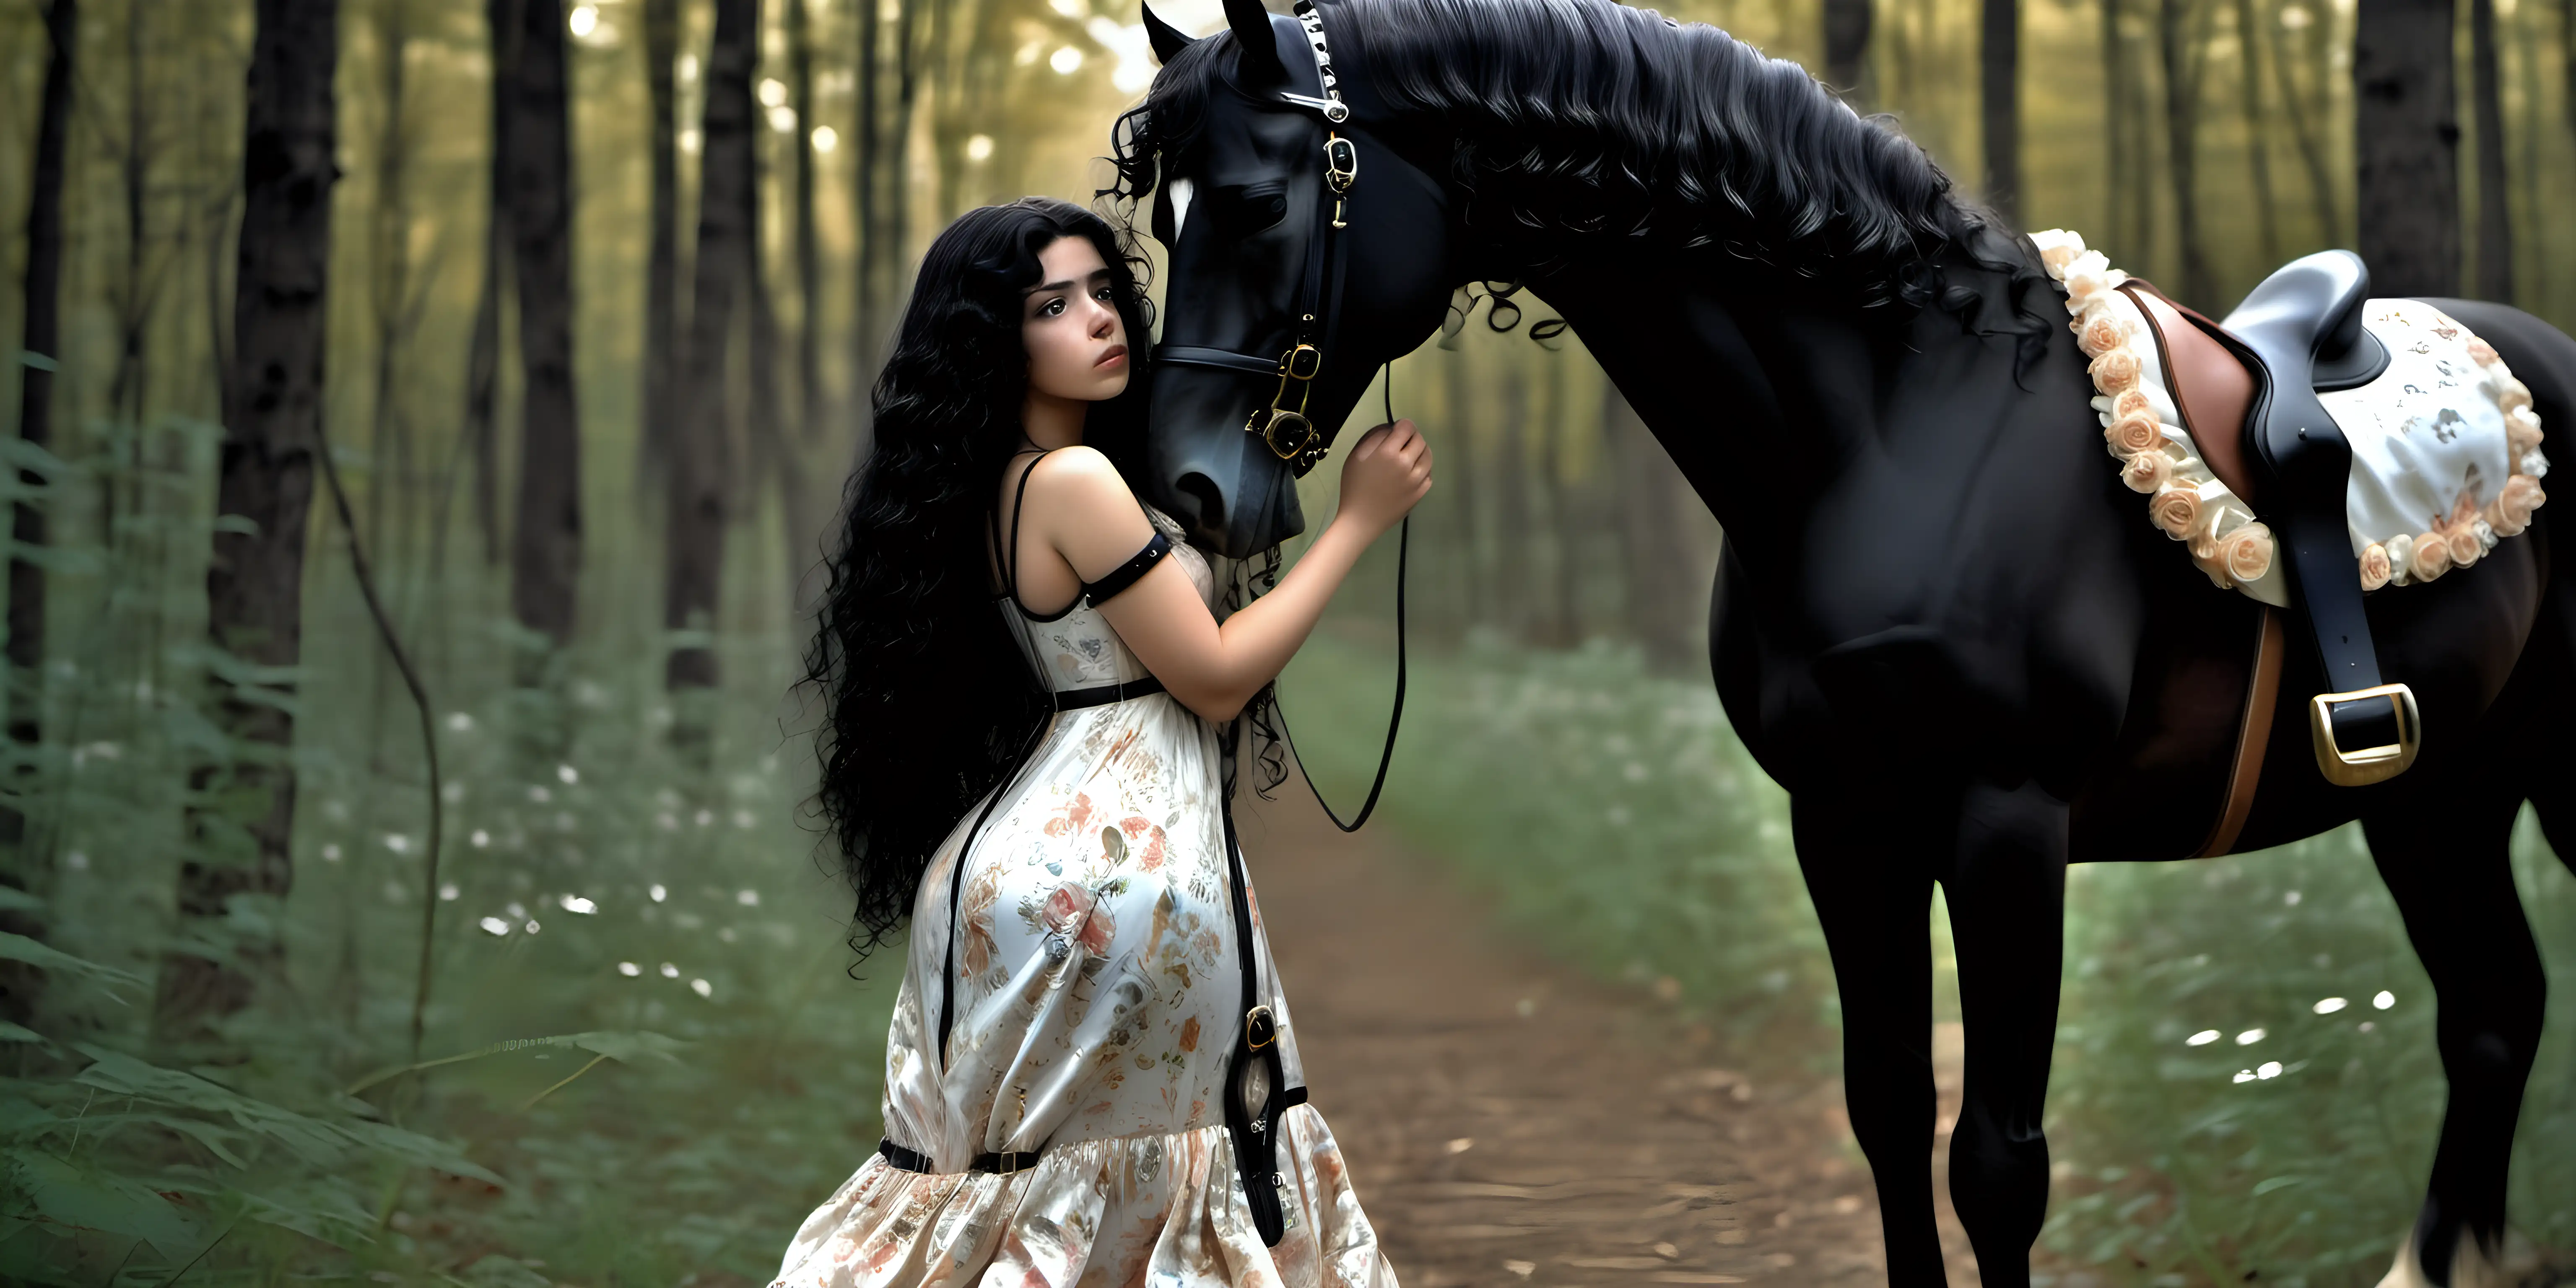 Enchanting Forest Bond CurlyHaired Equestrian Connection